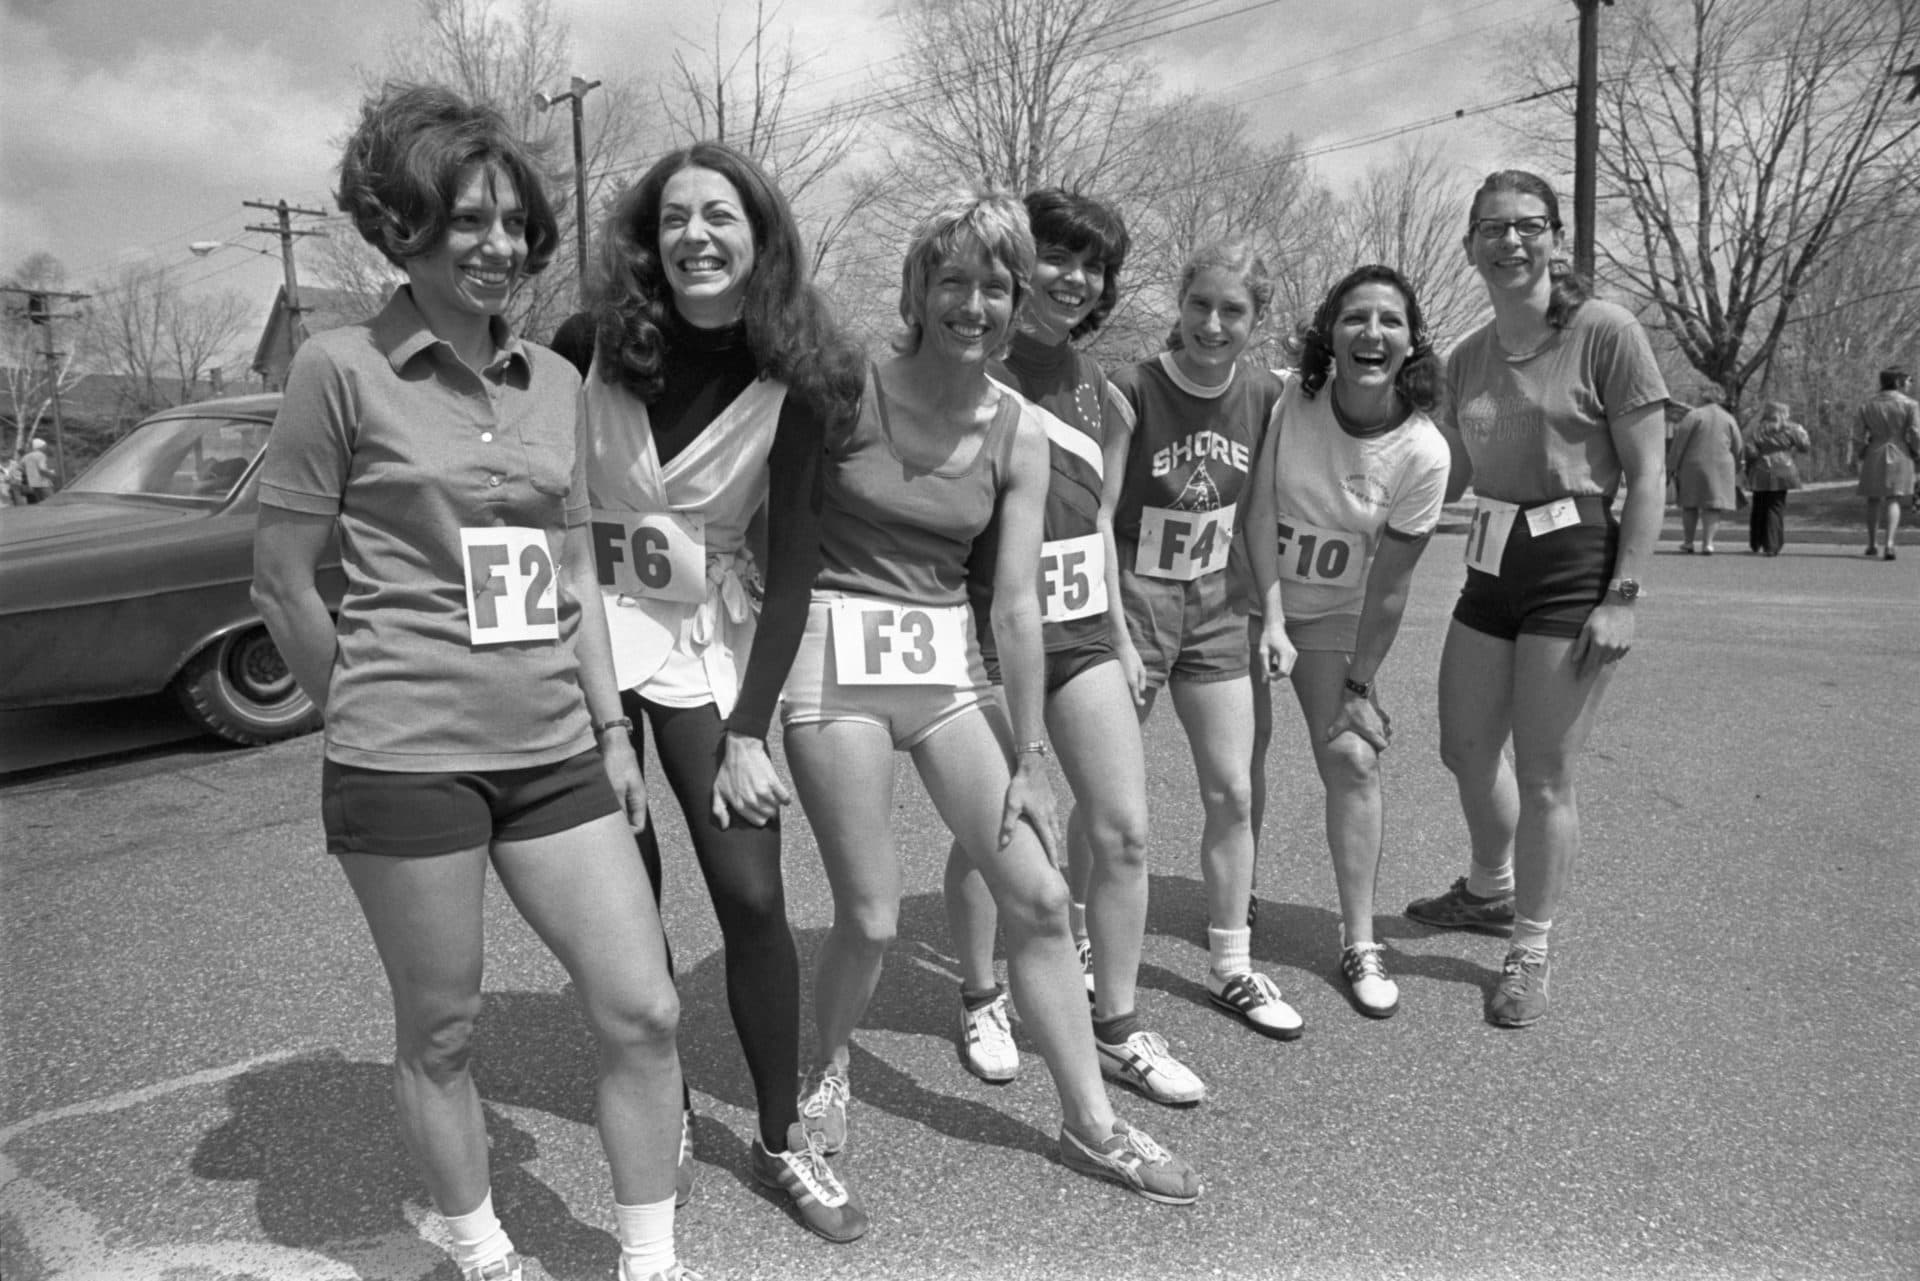 Women were first allowed to officially enter the Boston Marathon in 1972. The first group of runners (left to right) included Nina Kuscik; Kathy Miller; Elaine Pedersen; Ginny Collins; Pat Barrett Shore; Frances Morrison and Sara Mae Berman. (Bettmann/Contributor via Getty Images)